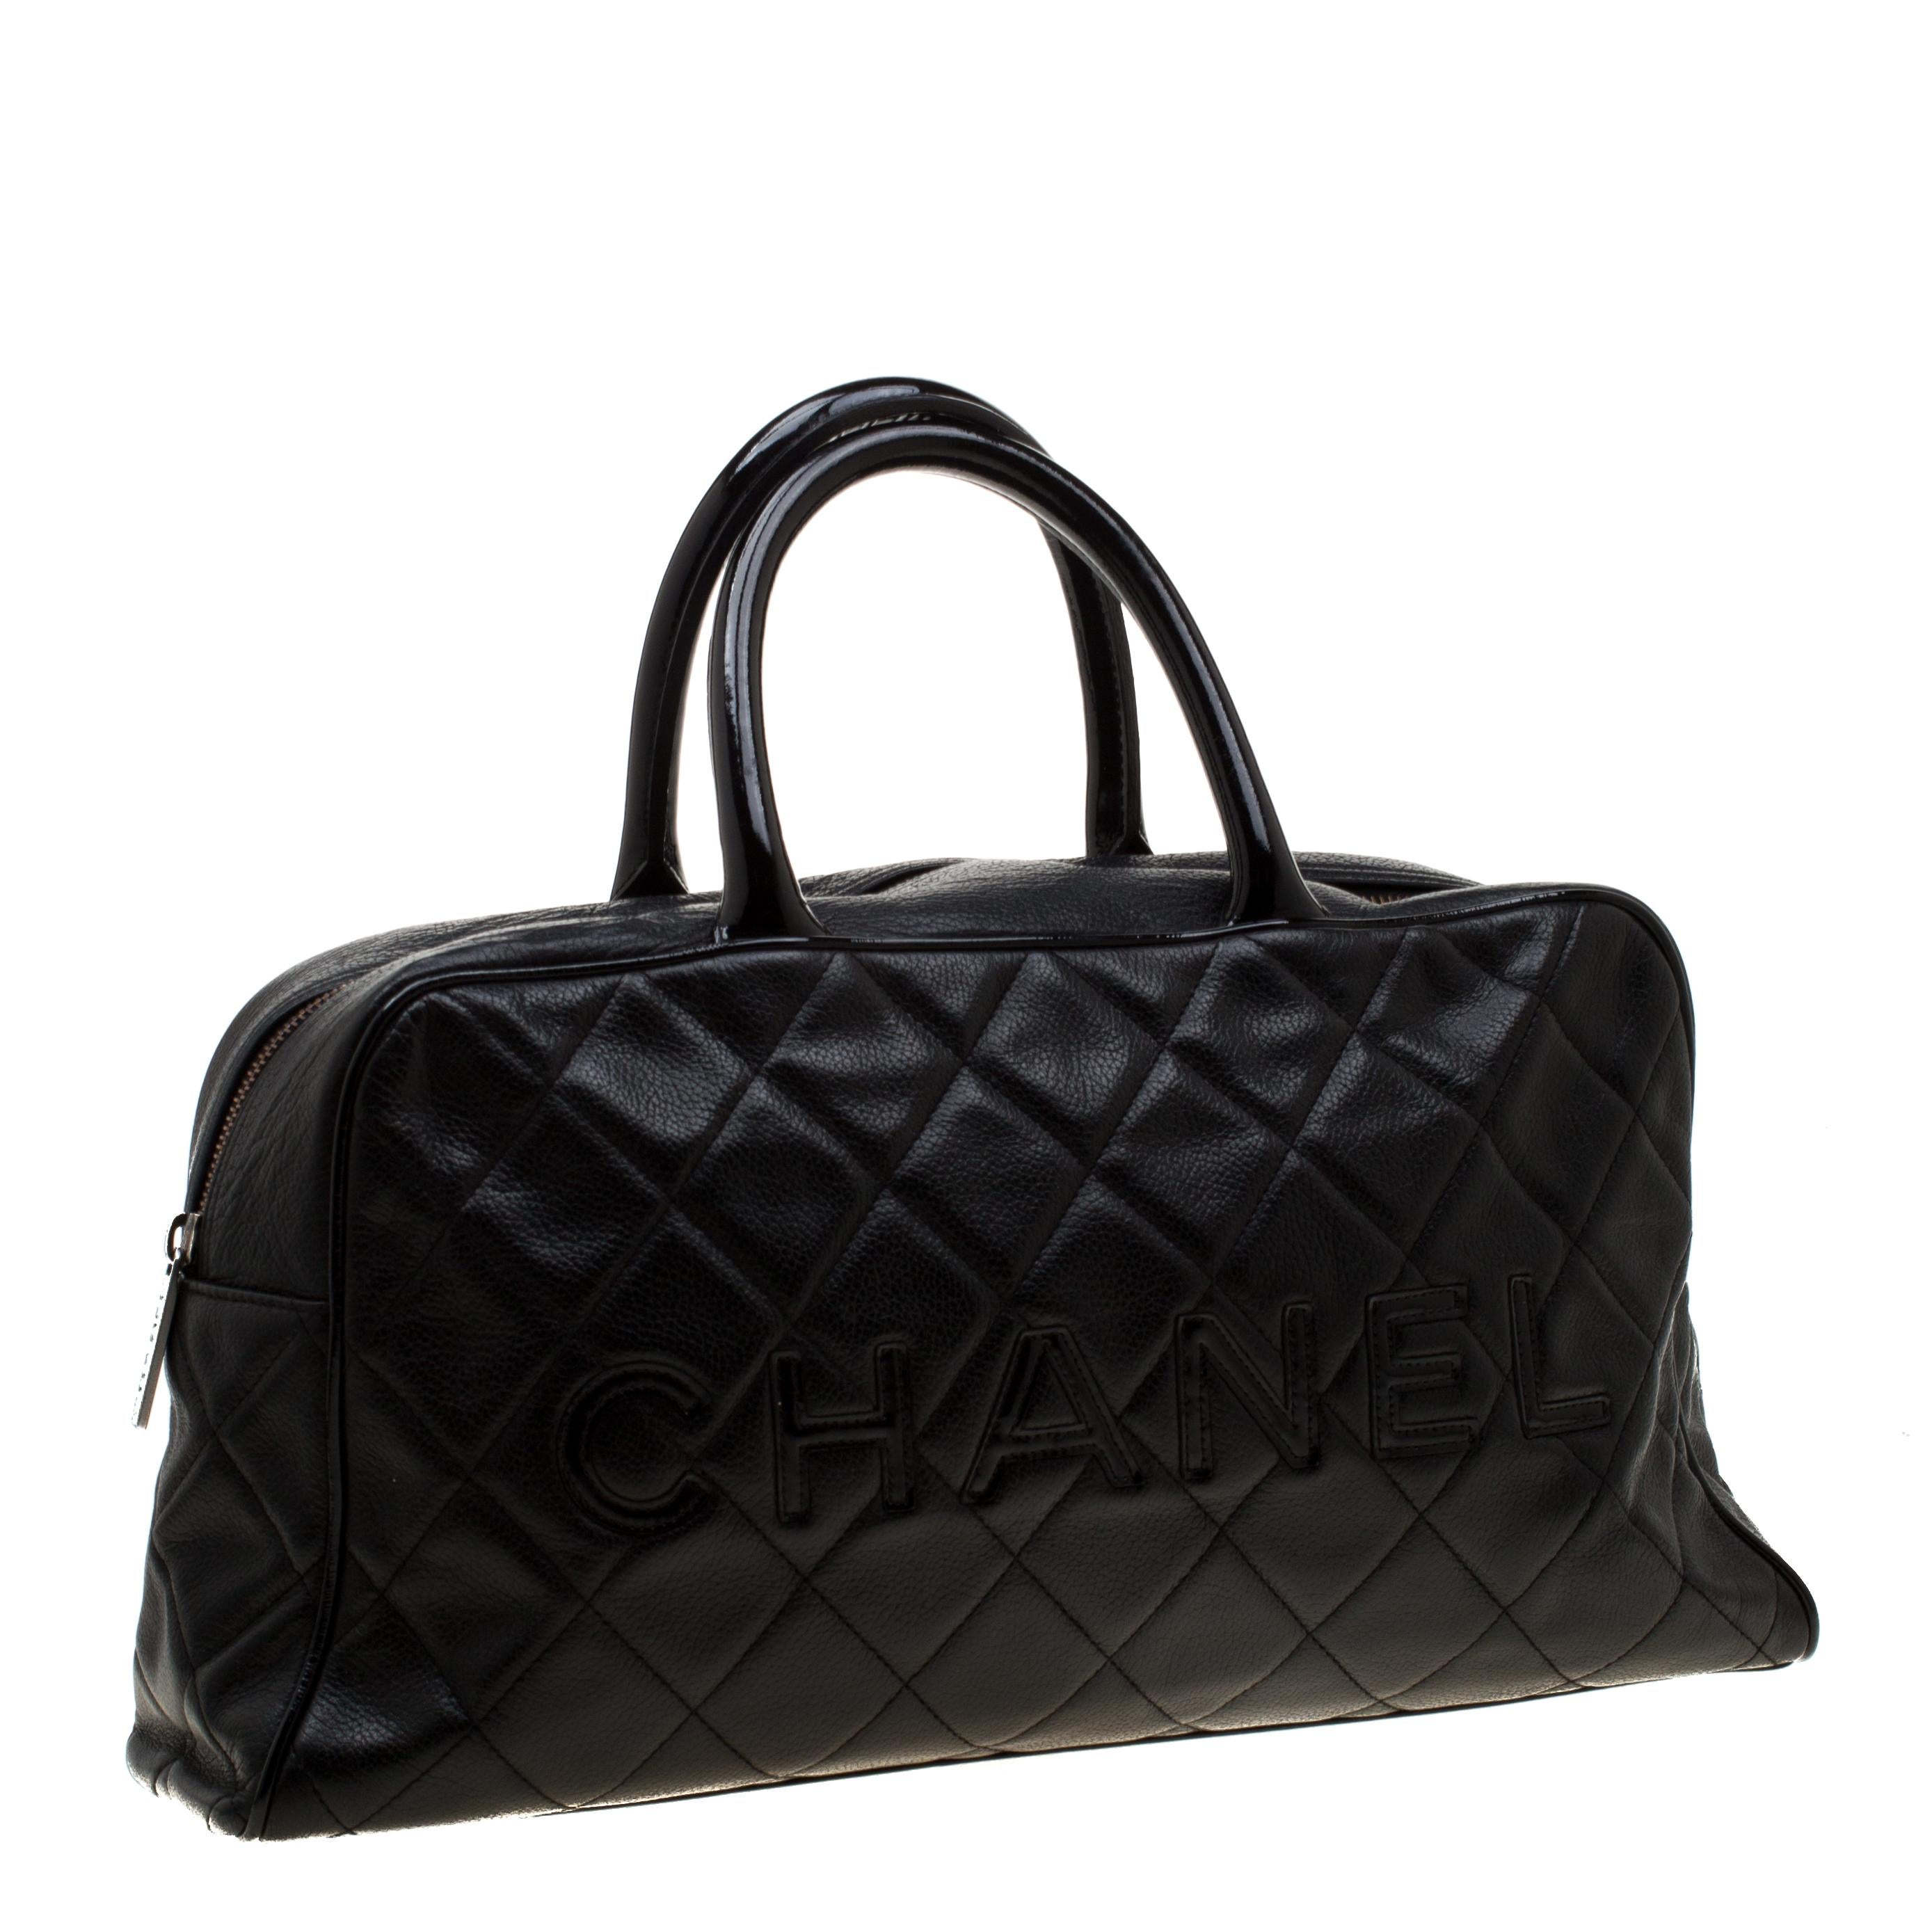 Women's Chanel Black Quilted Leather Enamel Boston Bag